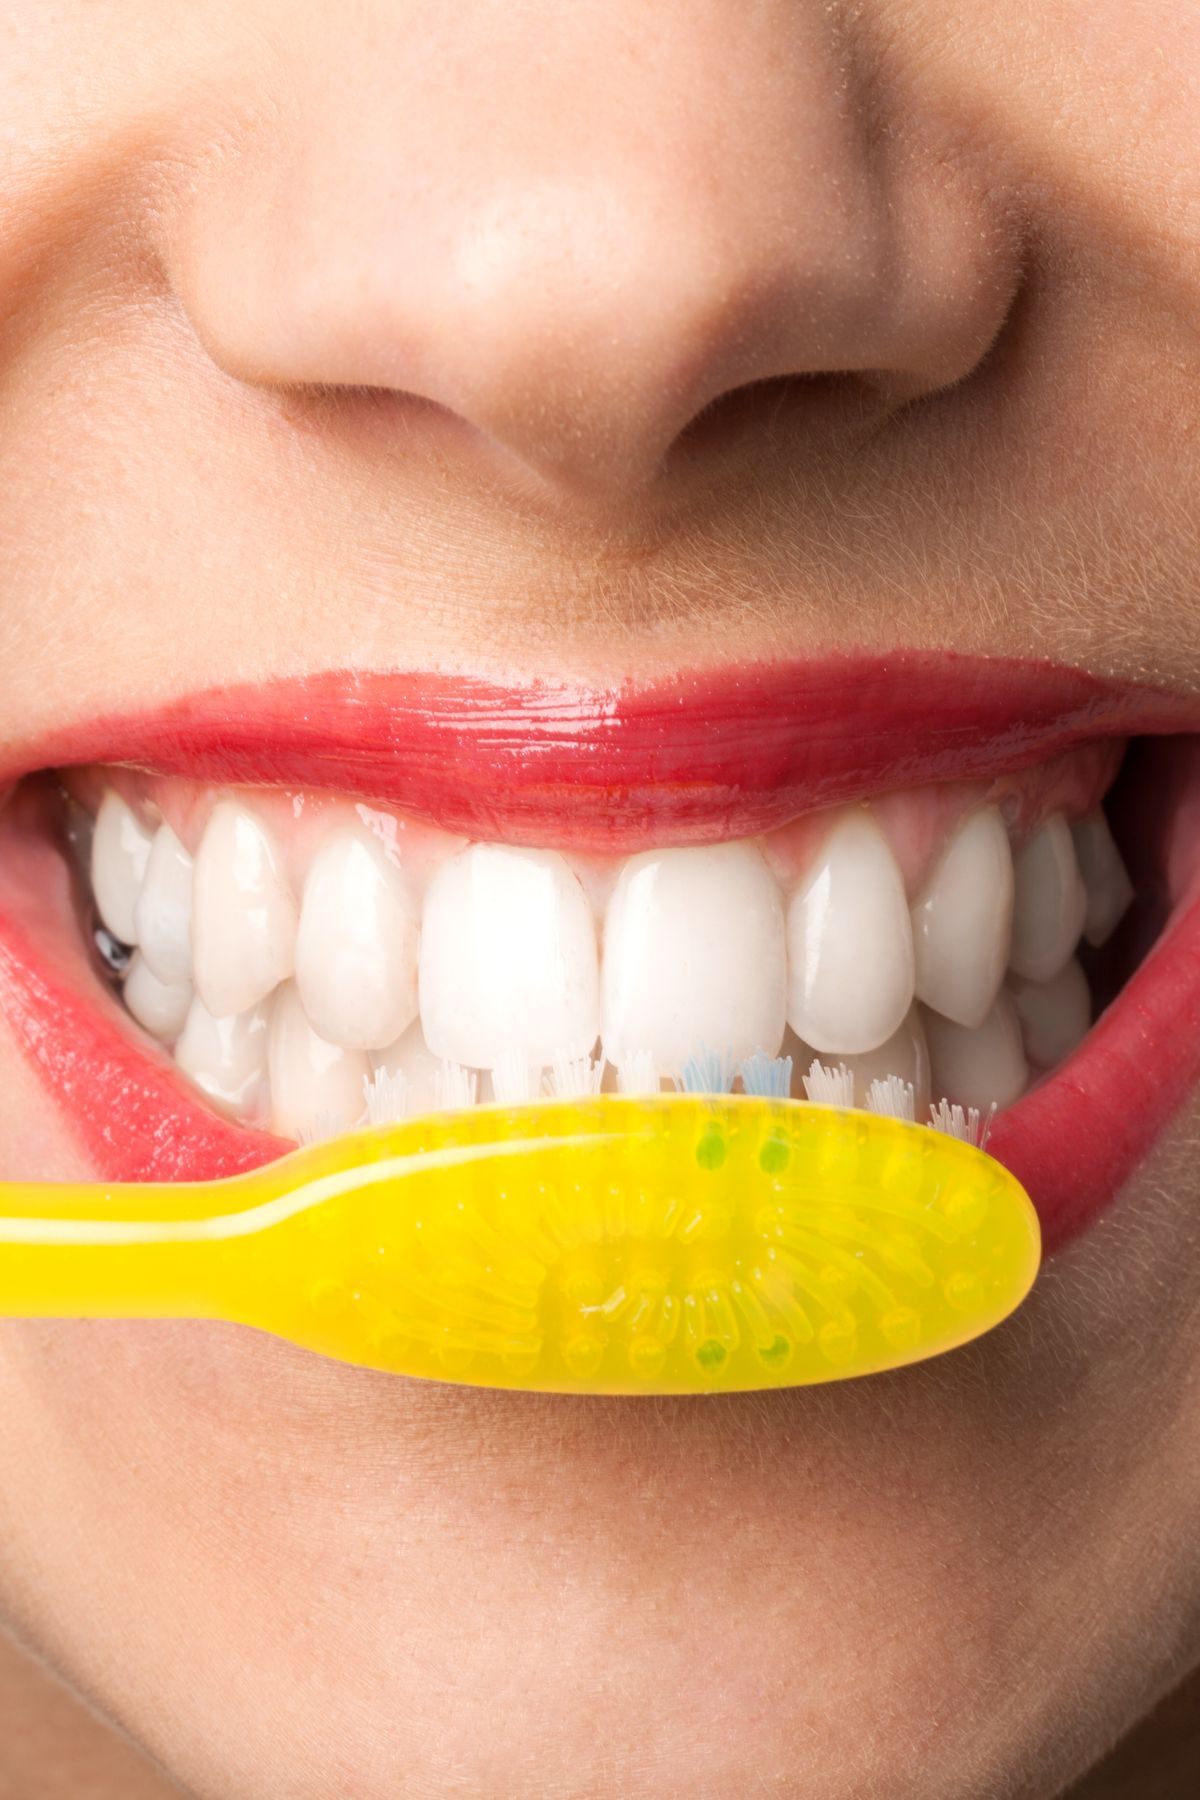 Close up image of a woman brushing her teeth with a yellow toothbrush.